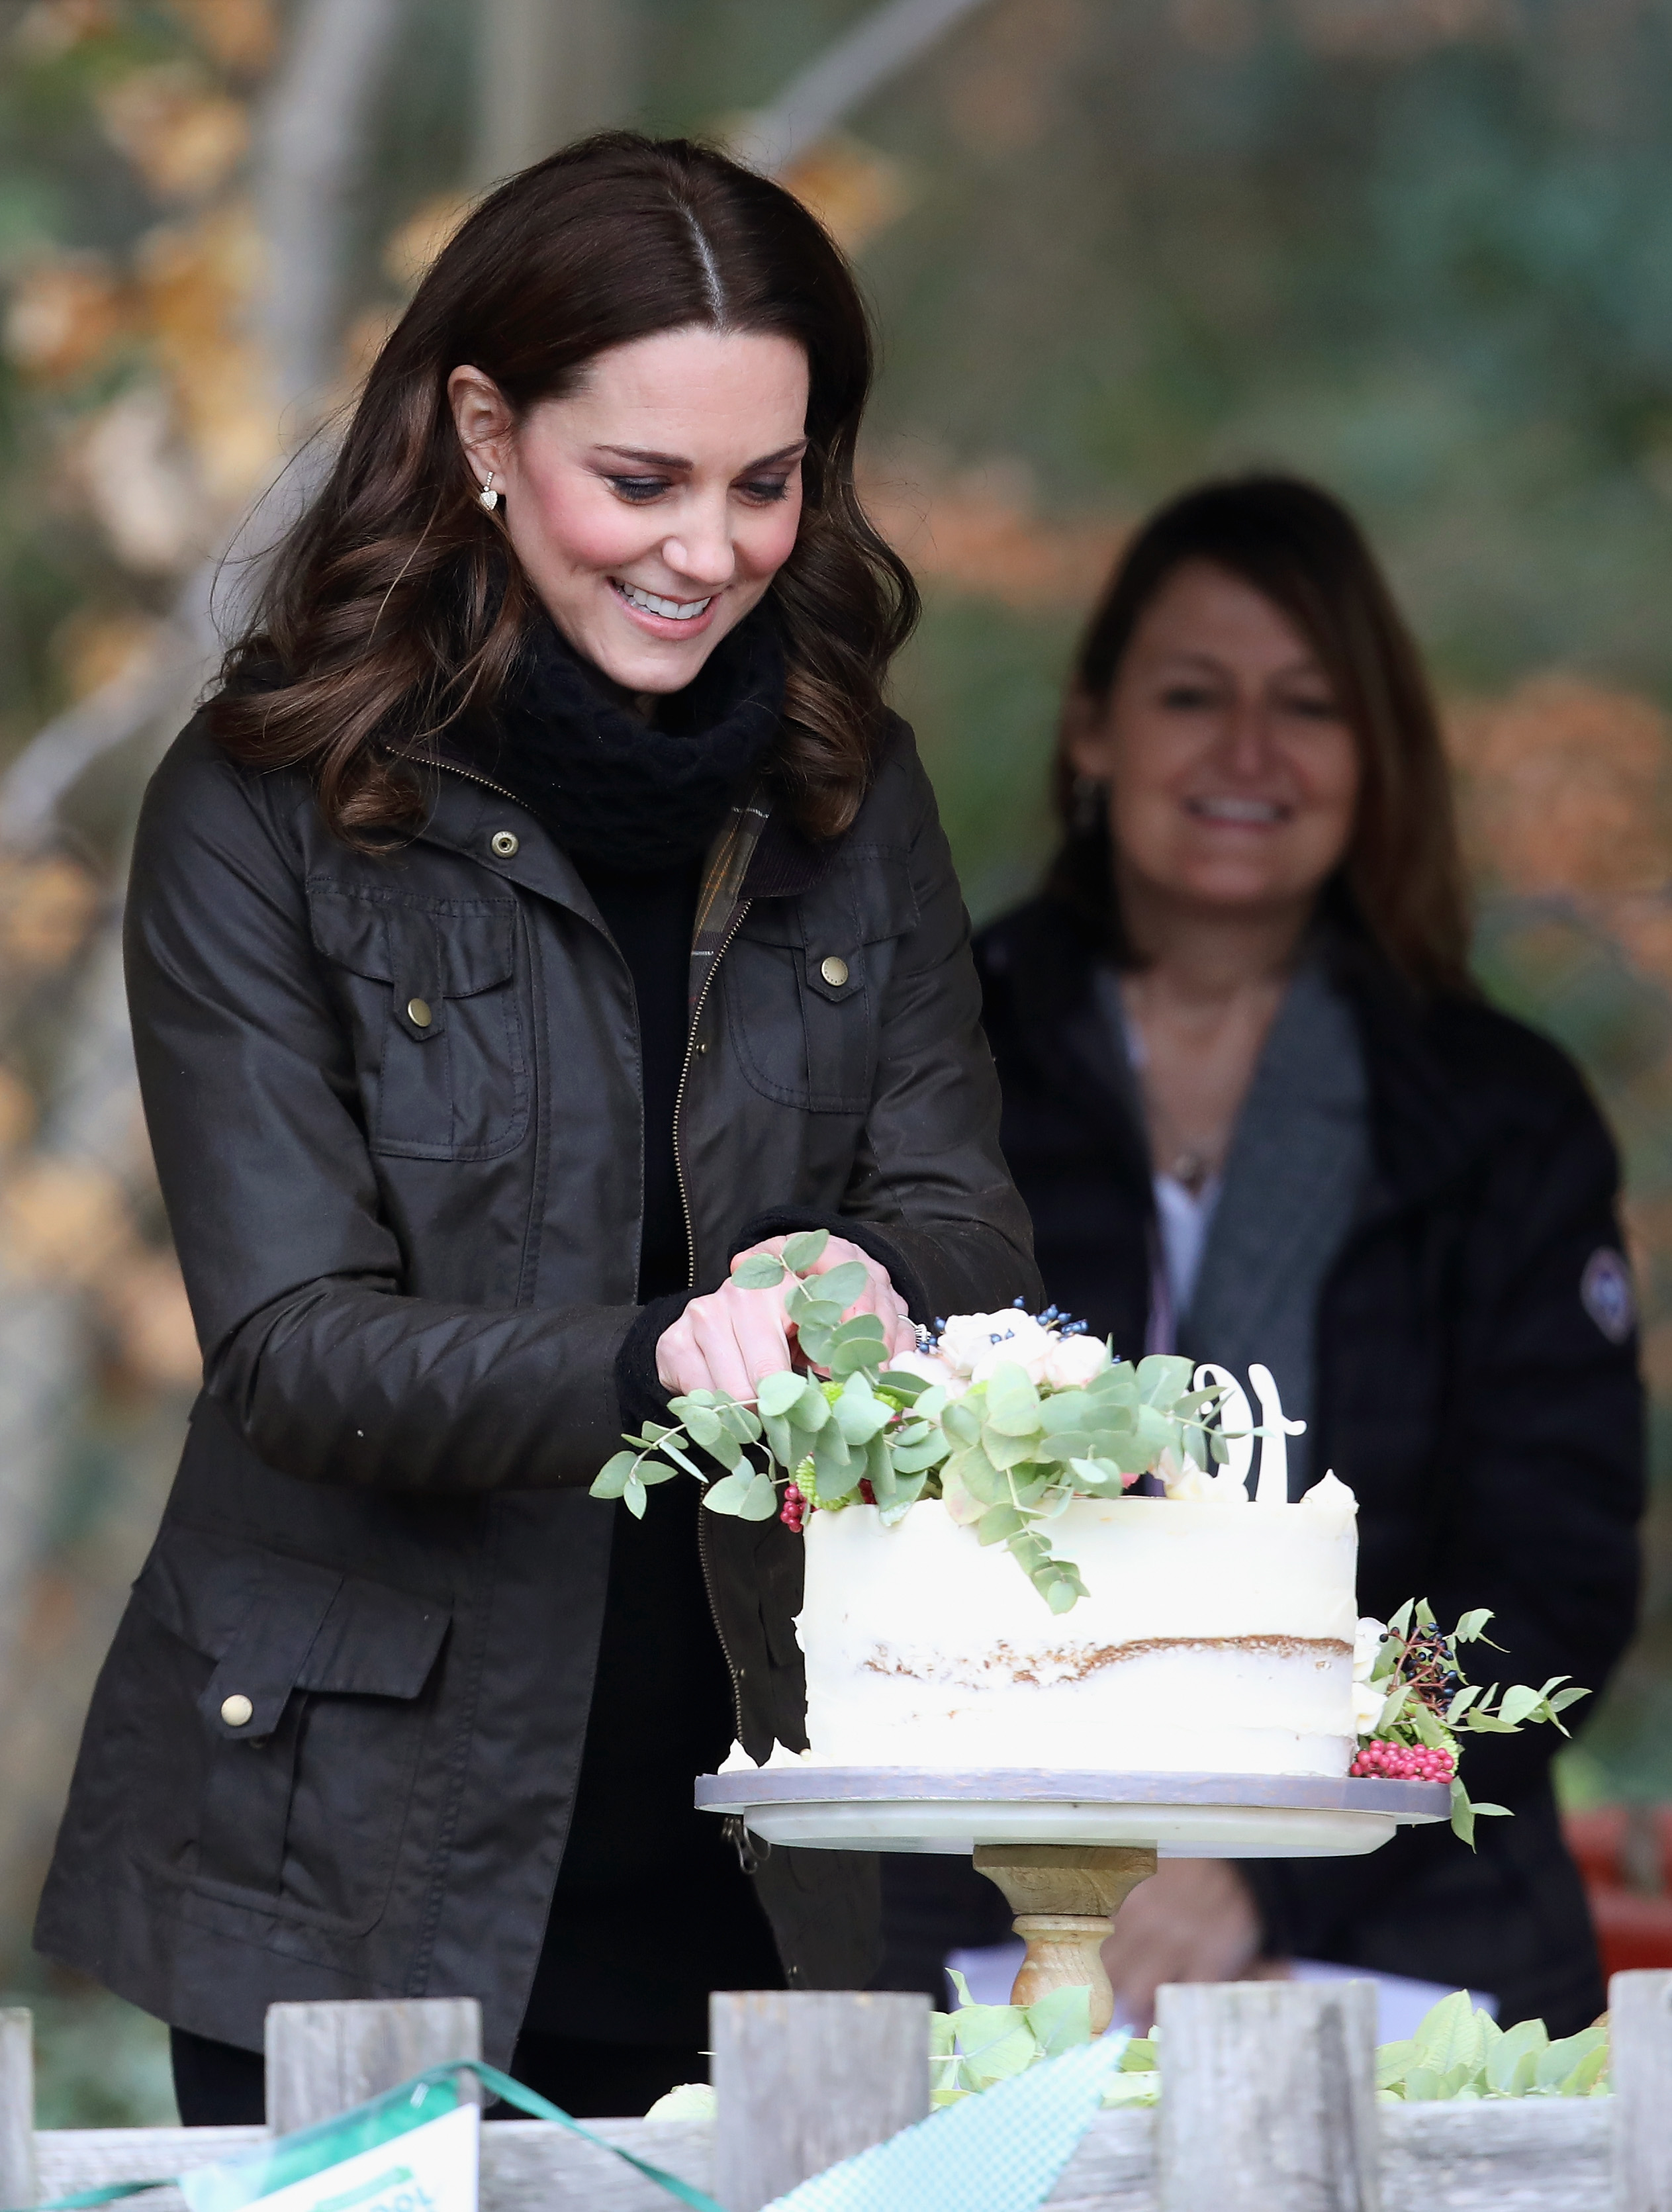 Kate Middleton cutting a cake during her visit to the Robin Hood Primary School in London, England on November 29, 2017 | Source: Getty Images